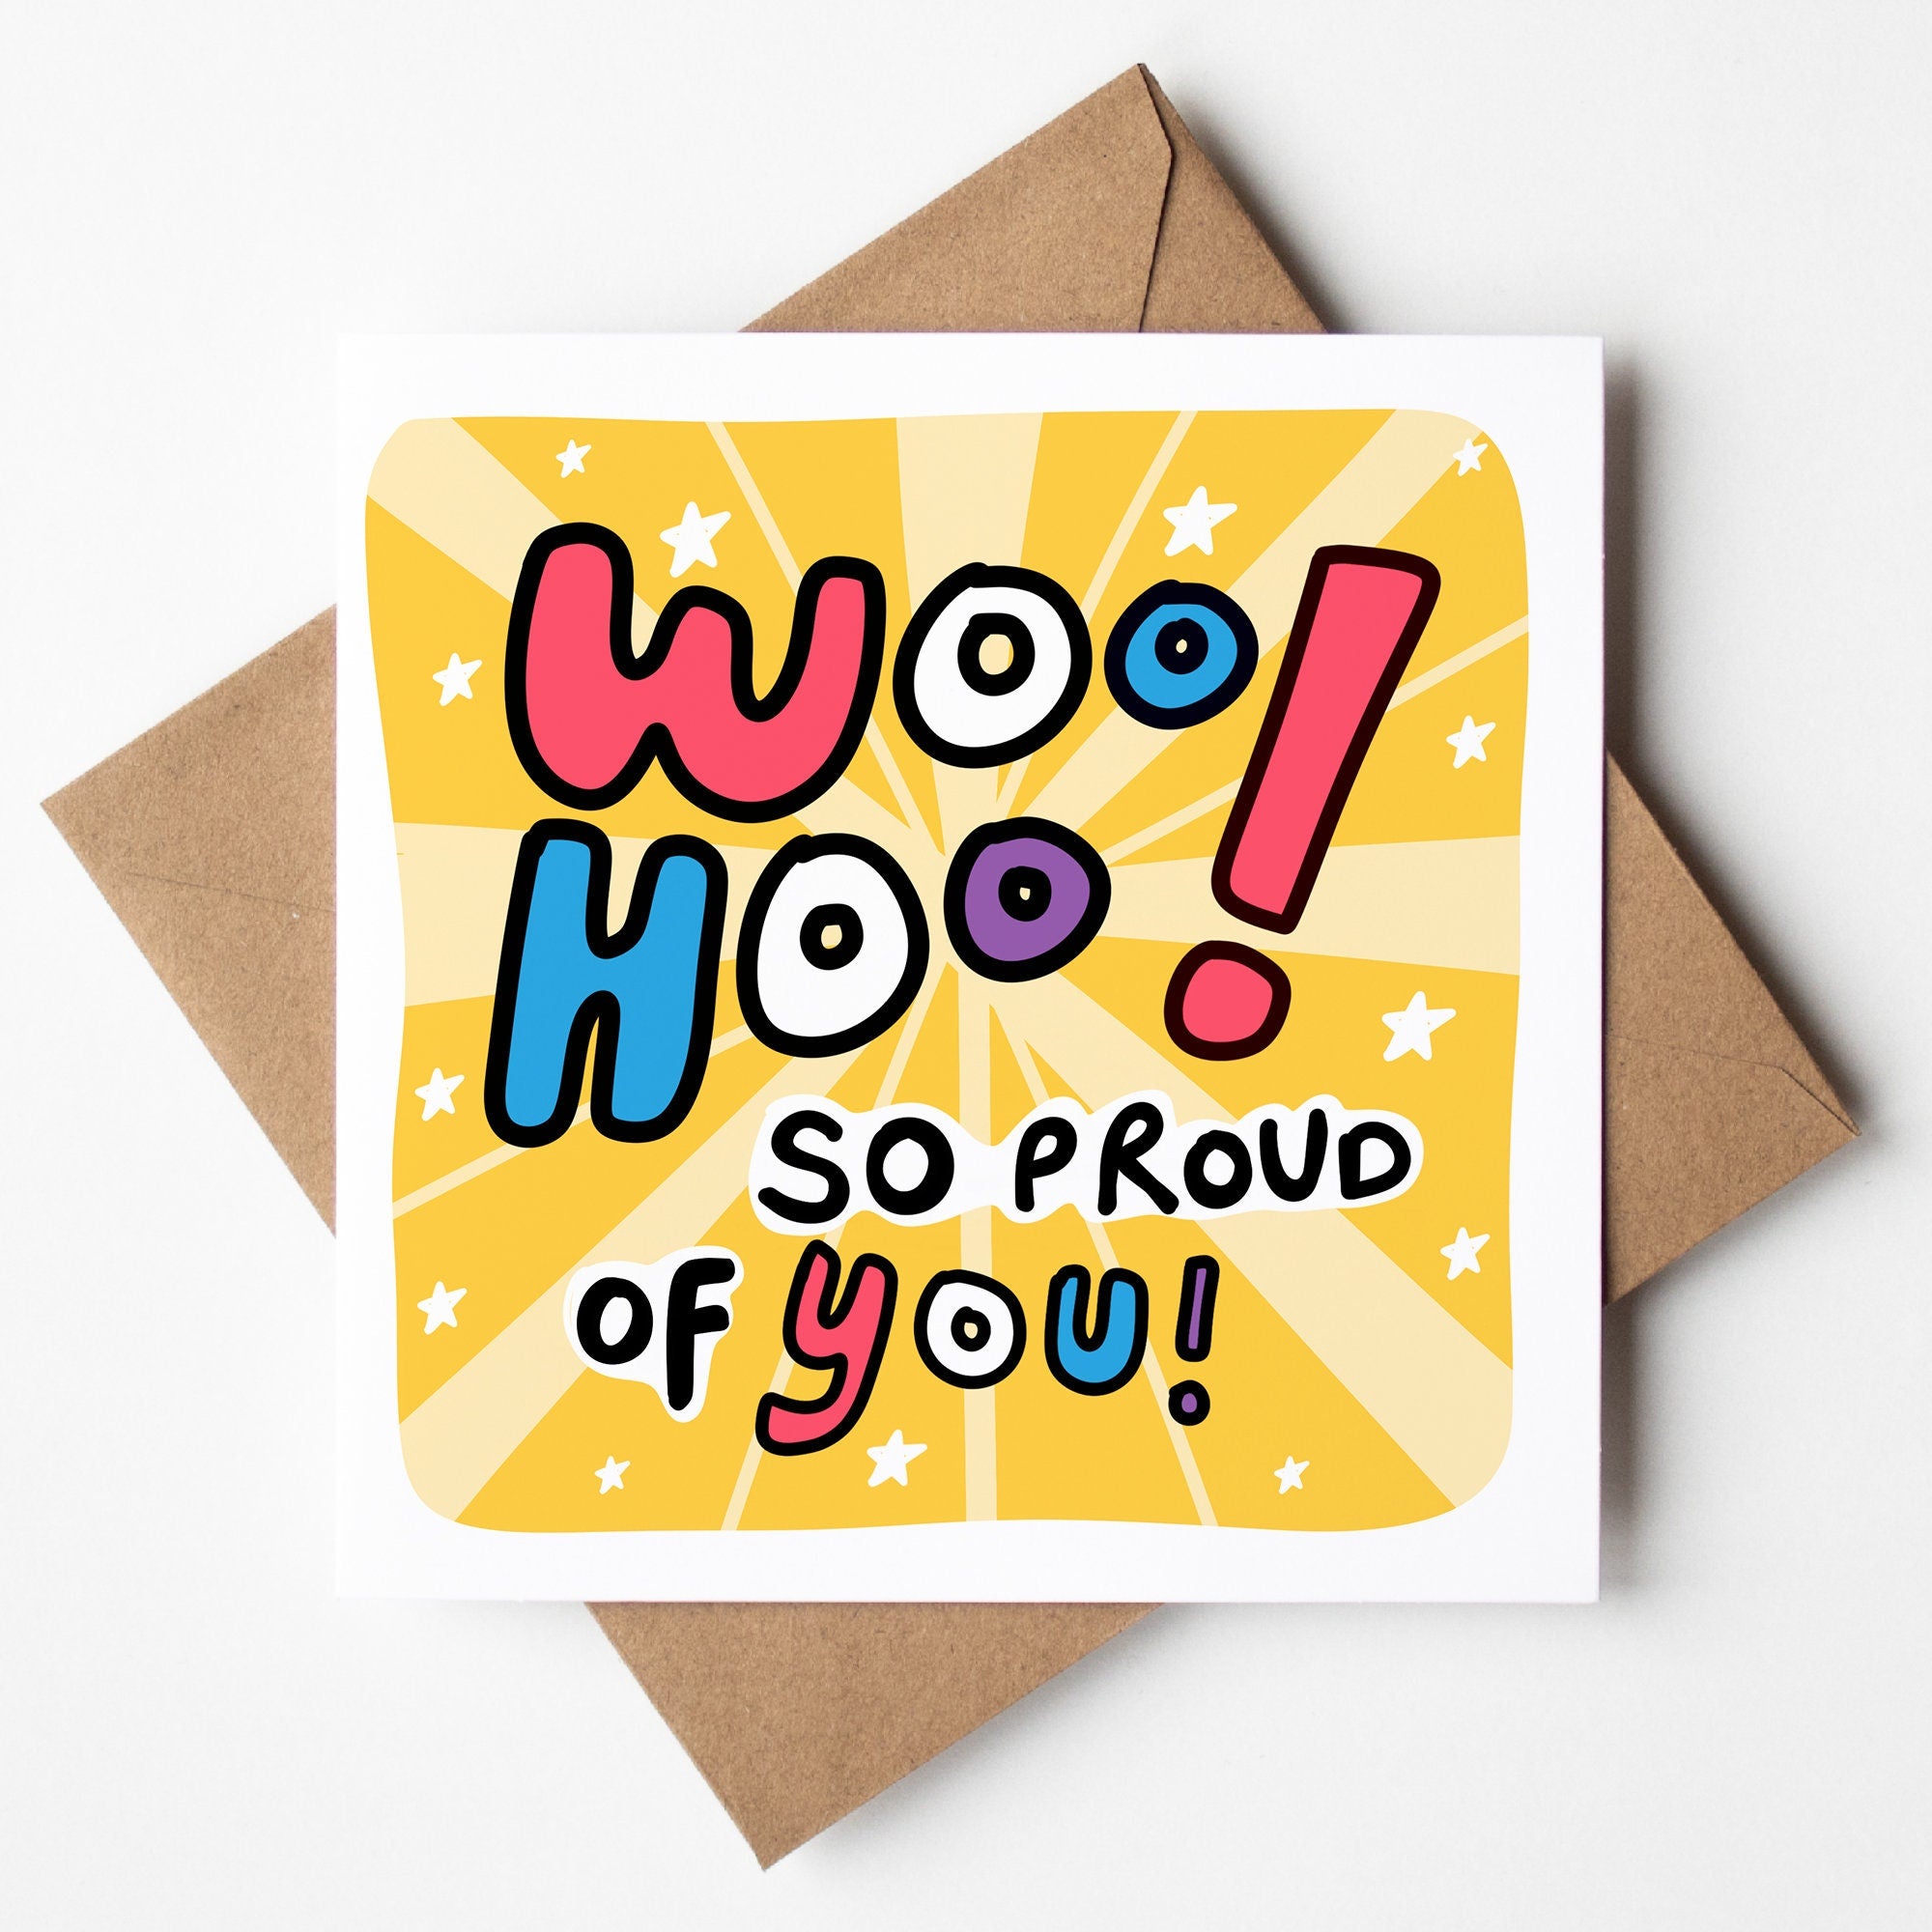 Woo Hoo So Proud Of You, You Passed, Exams Card, Funny Congratulations Card, Graduation, You Did It, New Job